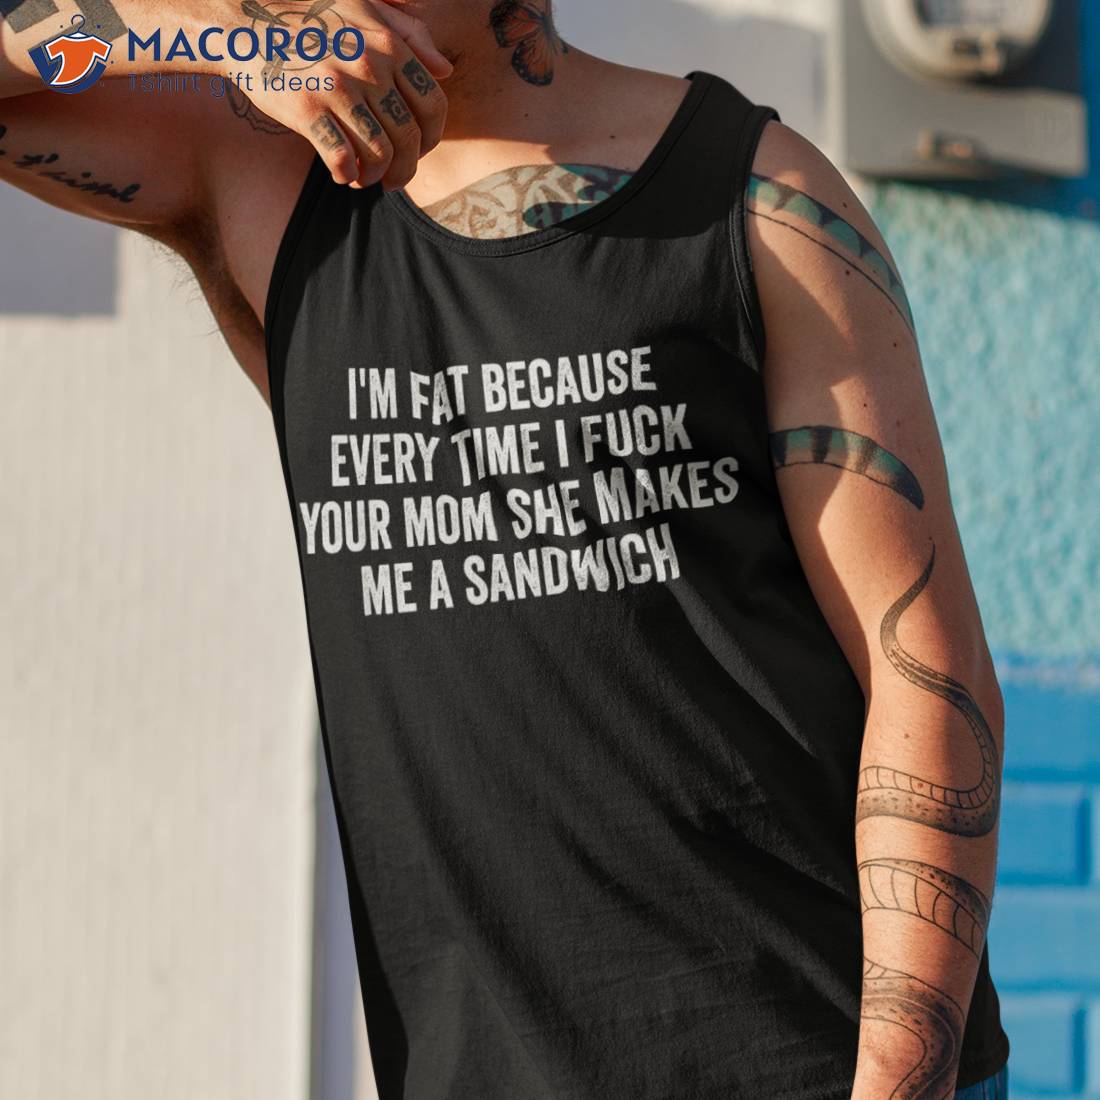 Im Fat Because I Fuck Your Mom Sandwich Fucking Sex Shirt pic pic